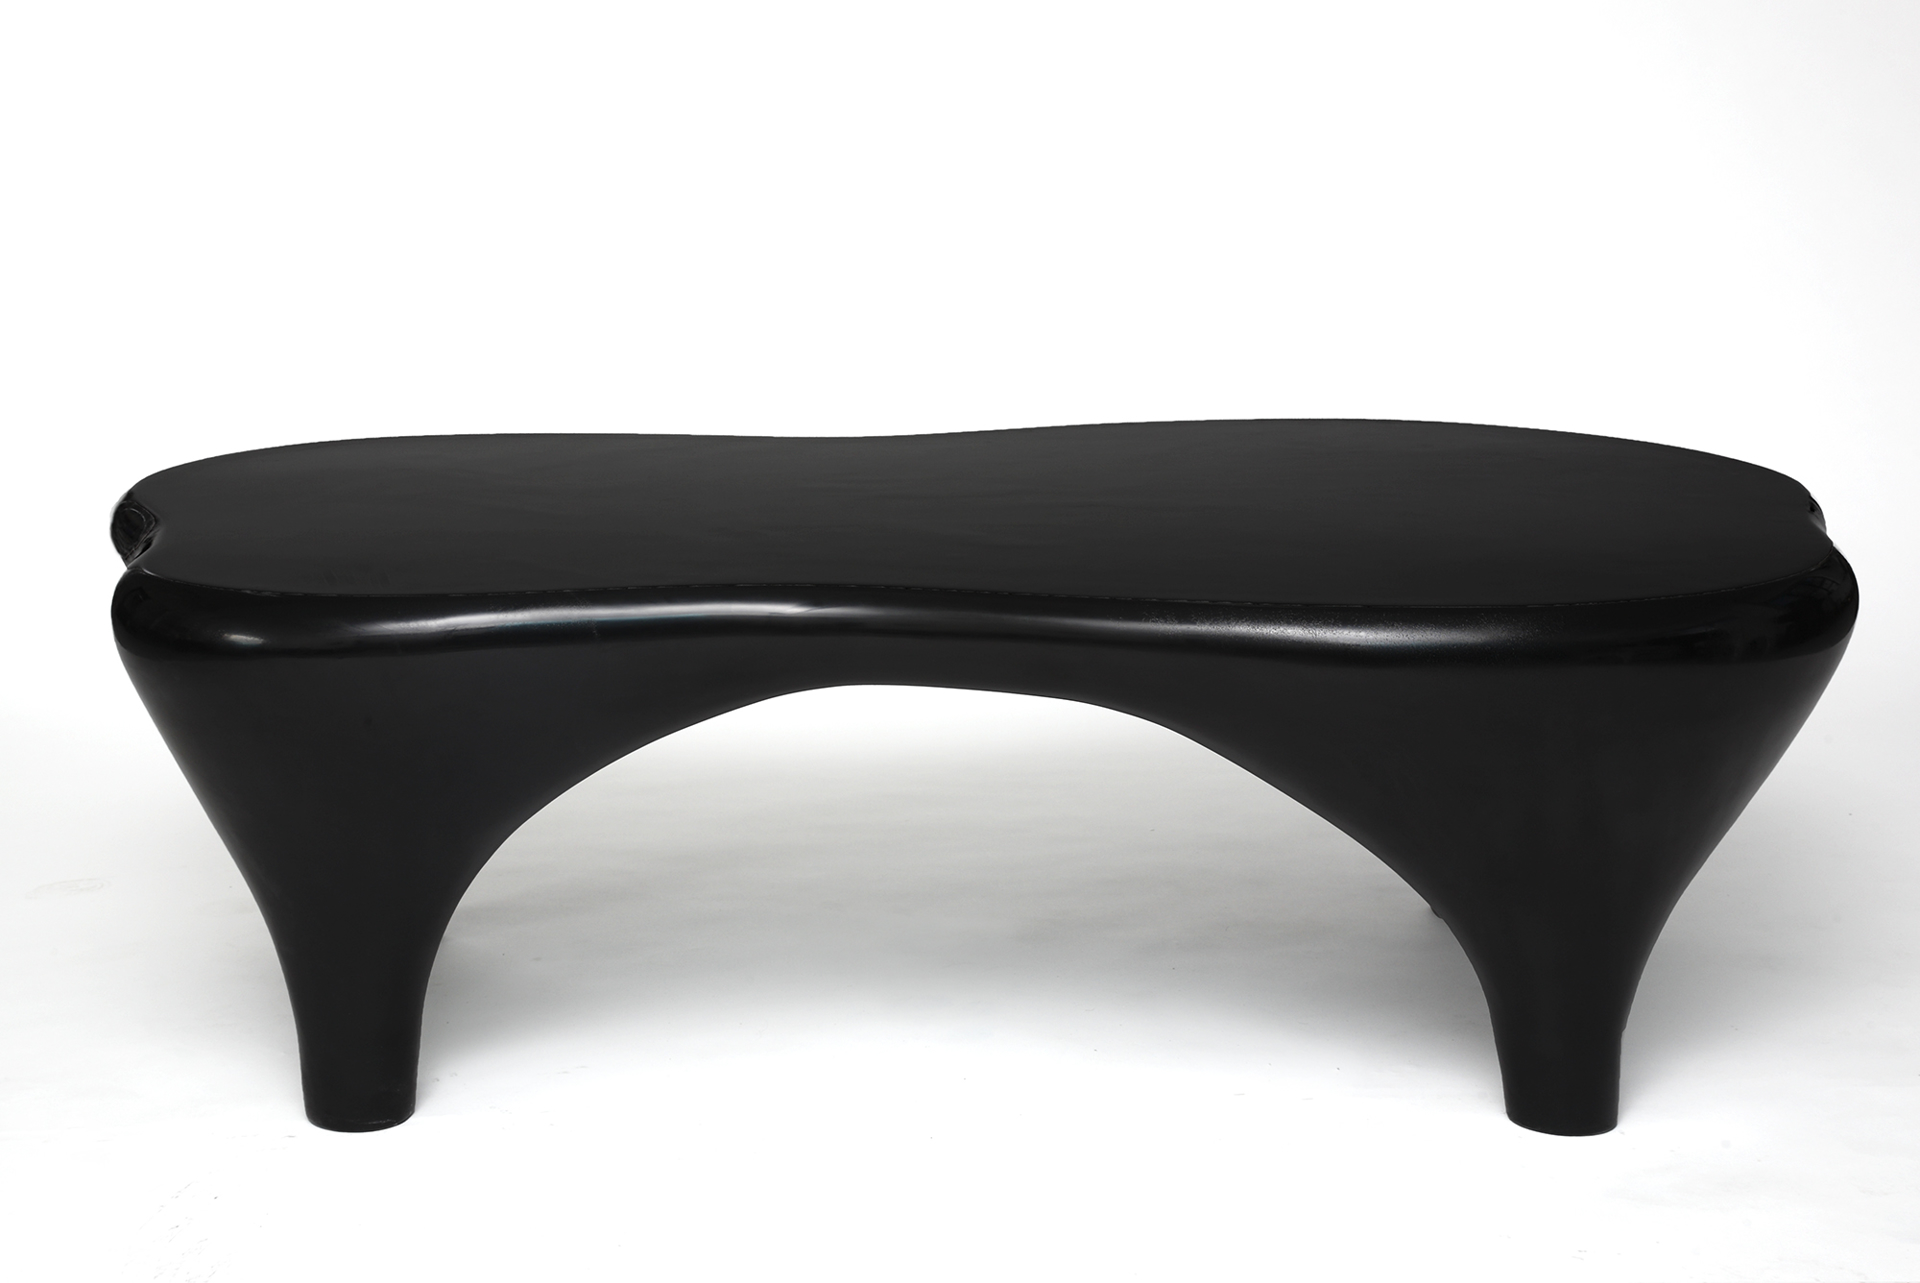 "Toro" Coffee table in black by Jacques Jarrige